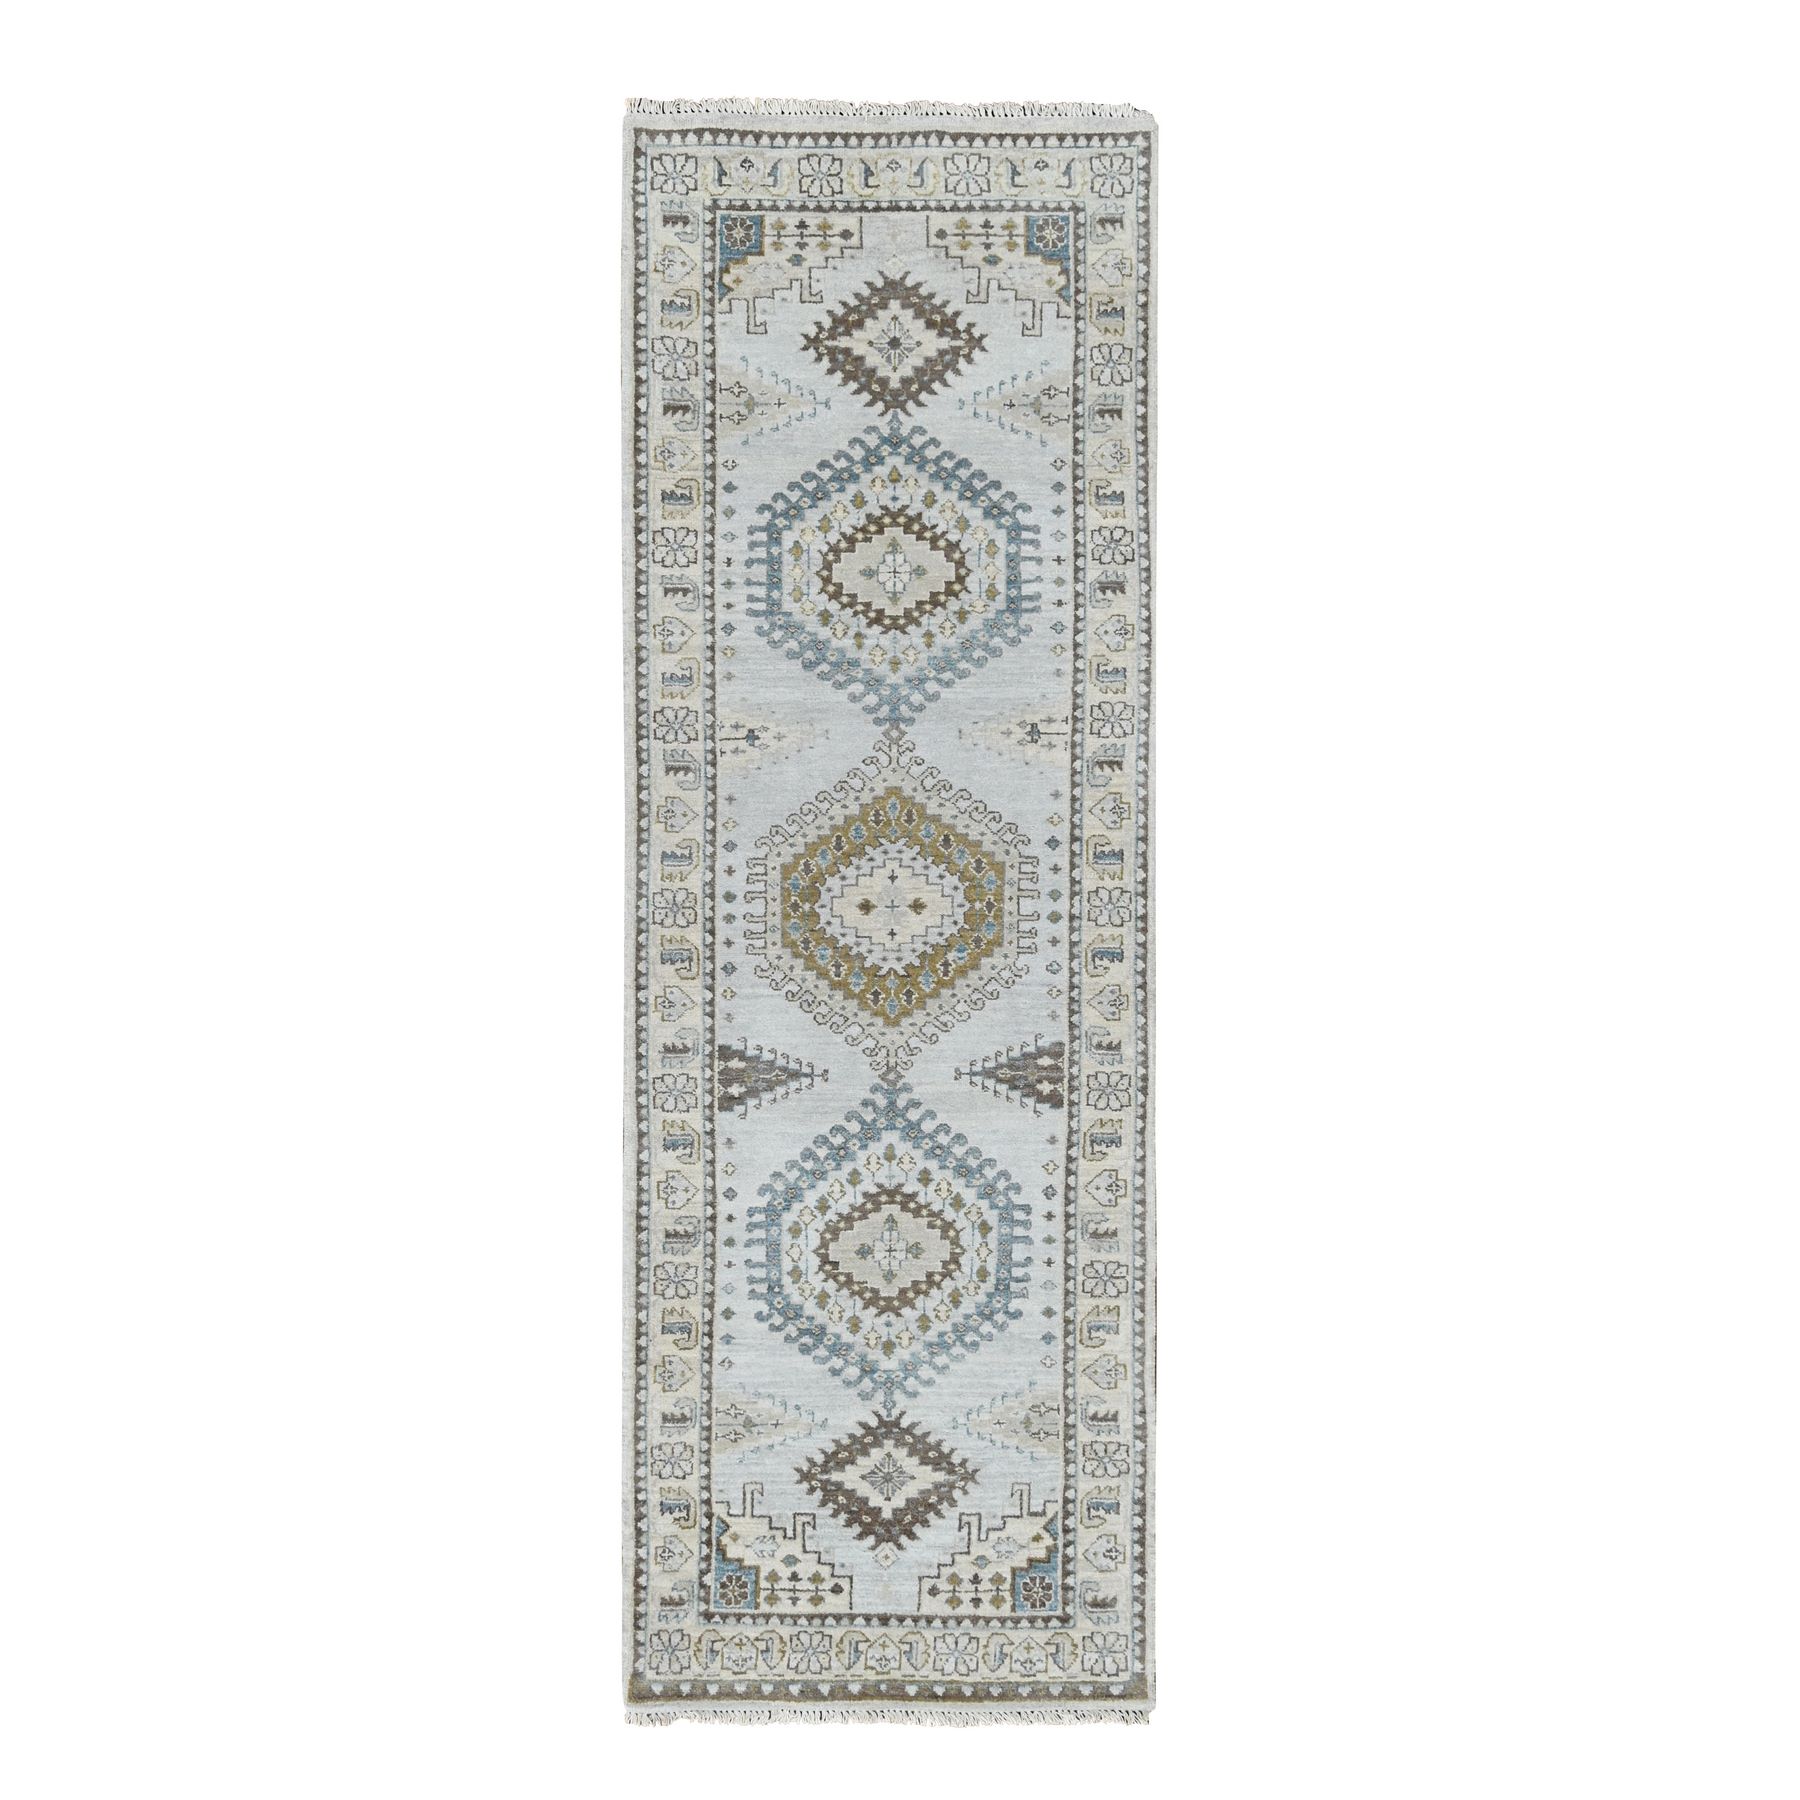 Argos Gray with Dover White, Hand Knotted Persian Village Influence Densely Woven Medallion Design, Vegetable Dyes, Organic Wool Runner Oriental Rug